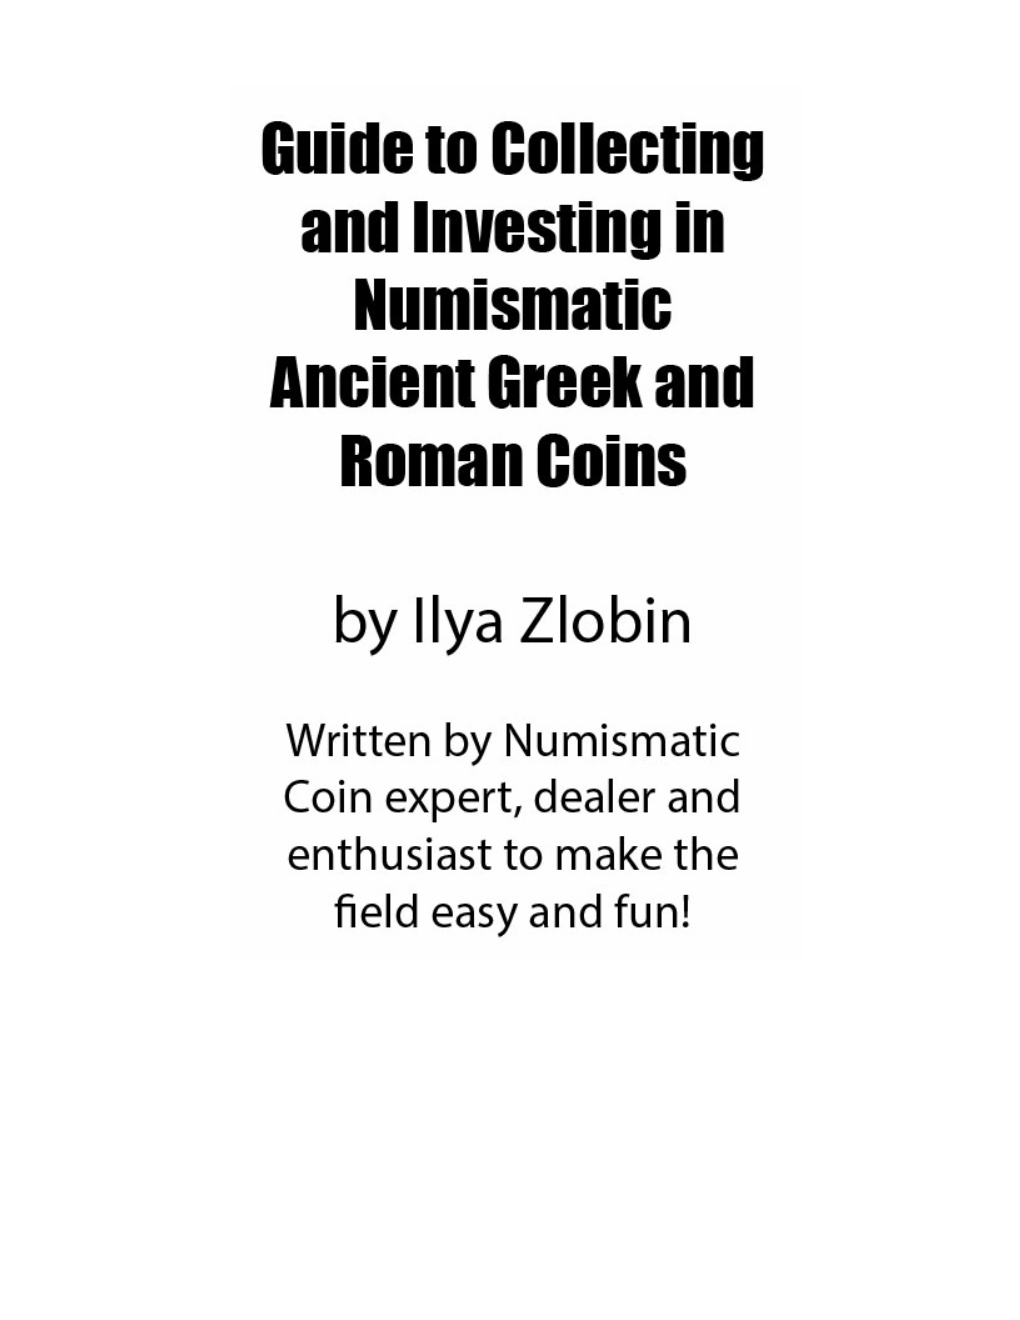 Ancient Greek and Roman Coins for Sale